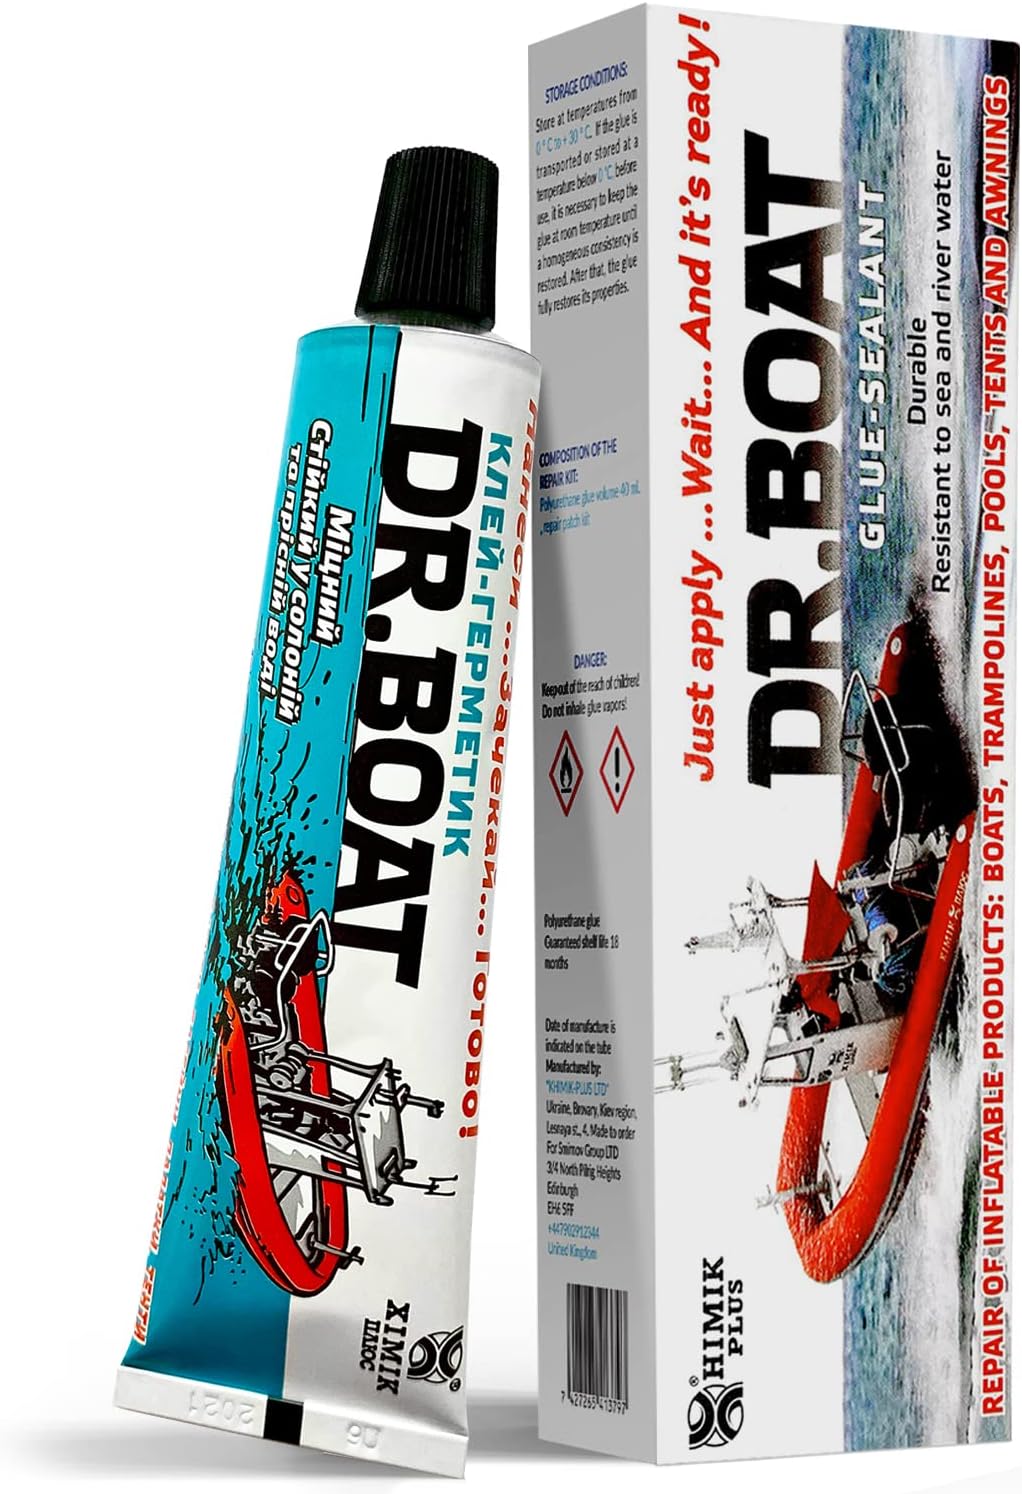 Dr Boat Heavy Duty Repair Kit for Boat Kayak, Canoe, Tent, Inflatables, Swimming Pool, Hot Tub - Liquid Patch Resistant to Fresh and Salt Water UV-Resistant Long-Lasting - 40ML